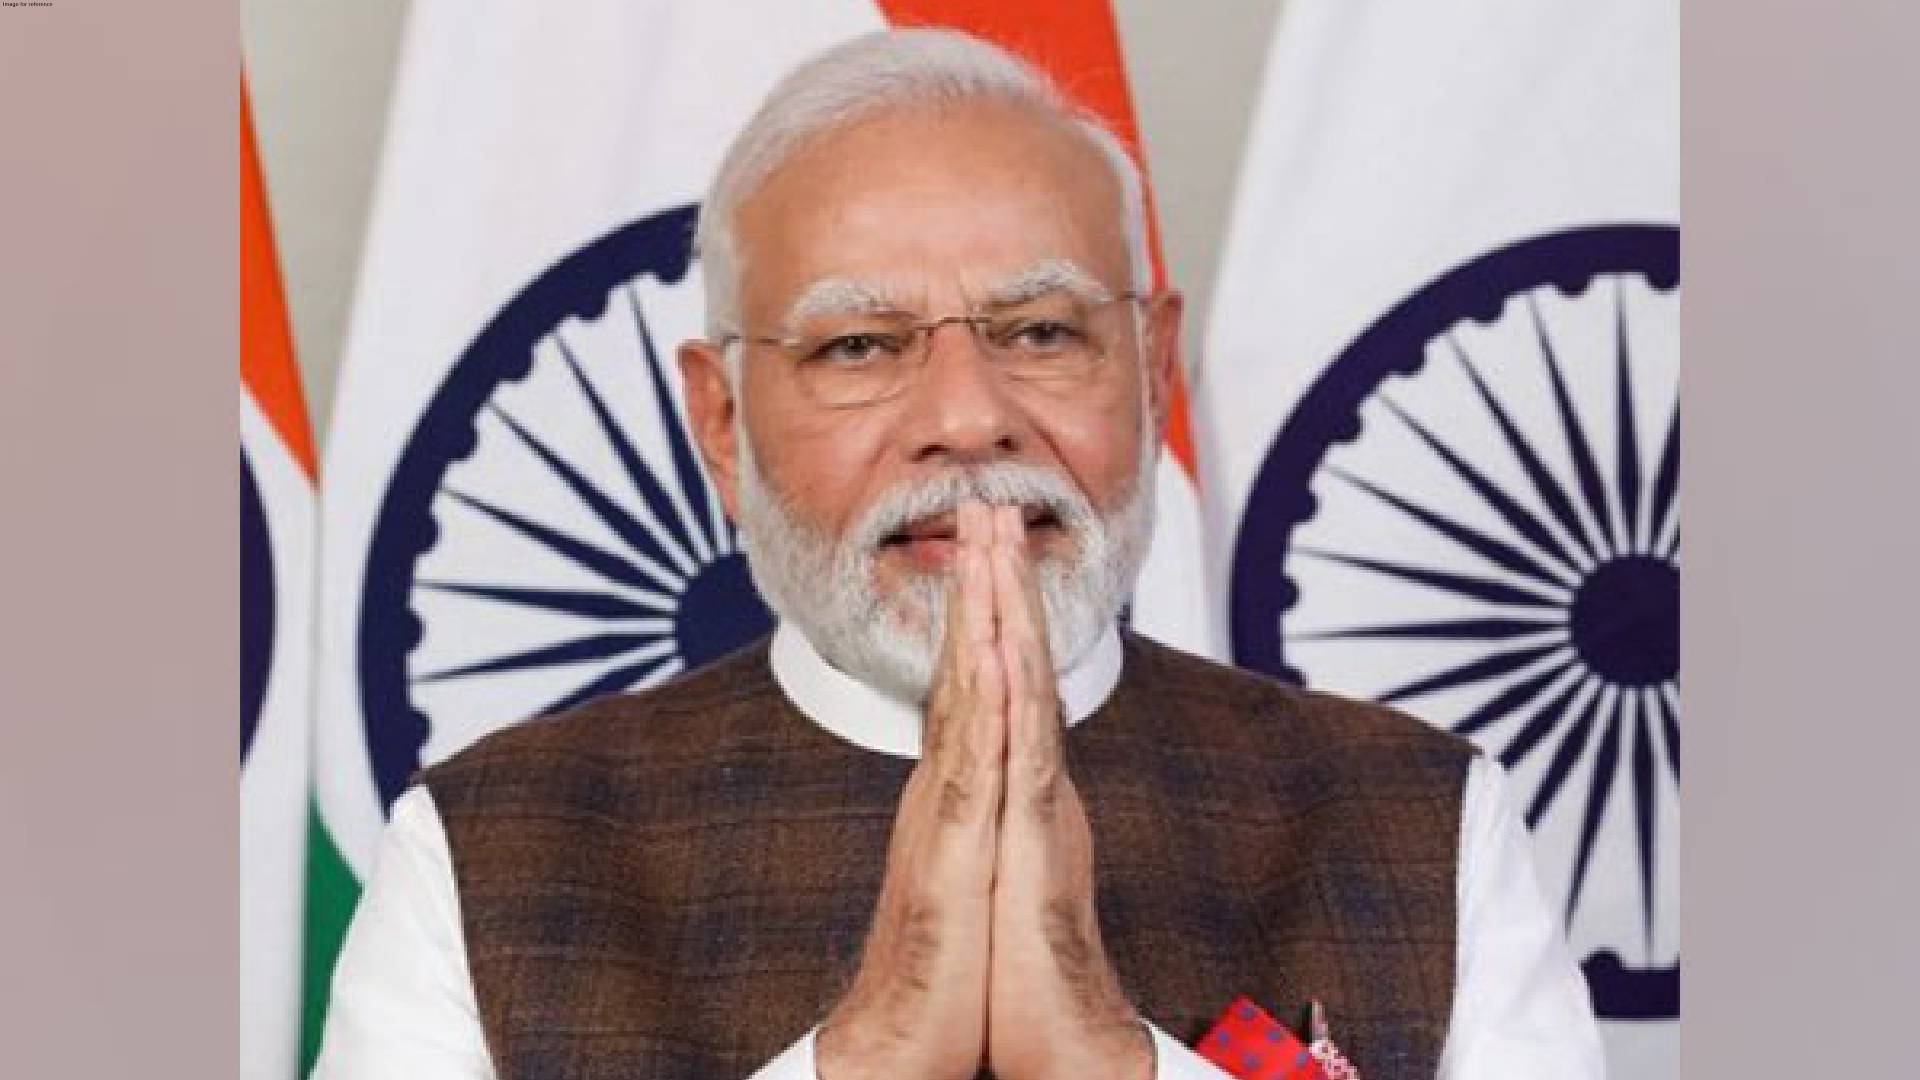 PM Modi announces cut in LPG prices by Rs 100 on International Women's Day